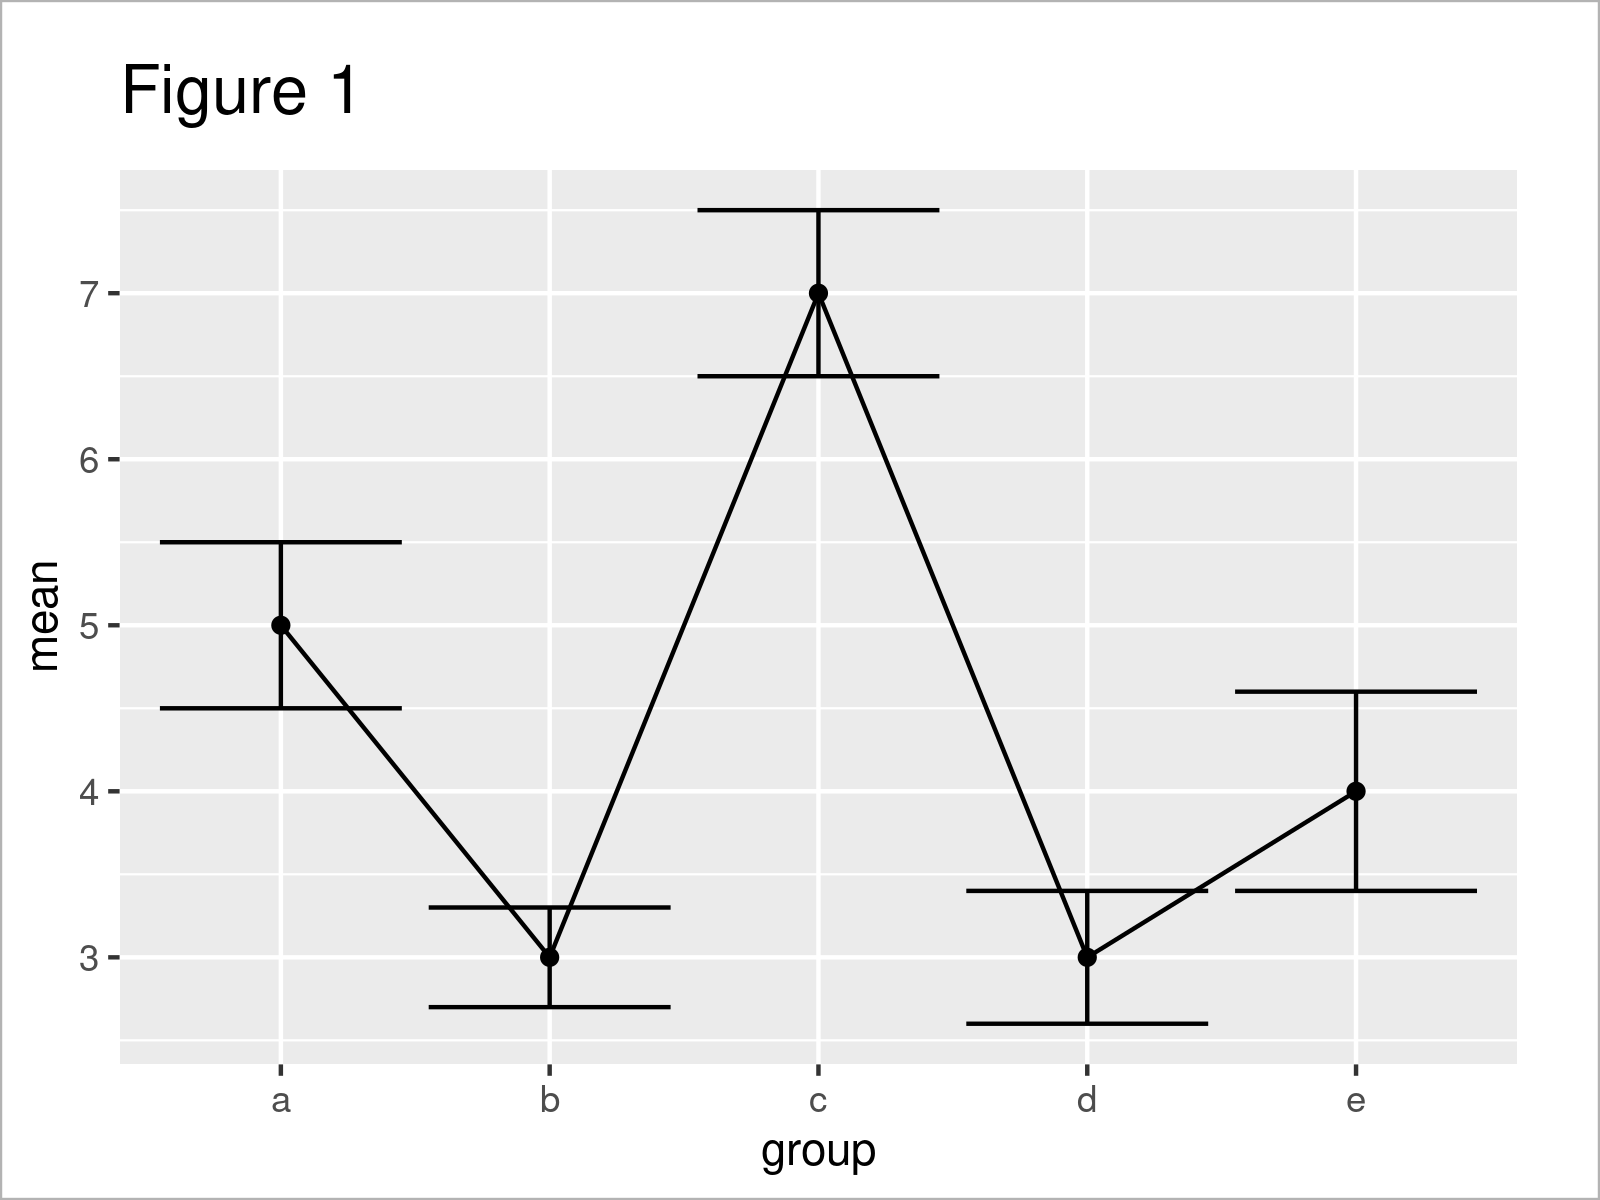 r graph figure 1 draw error bars connected mean points r